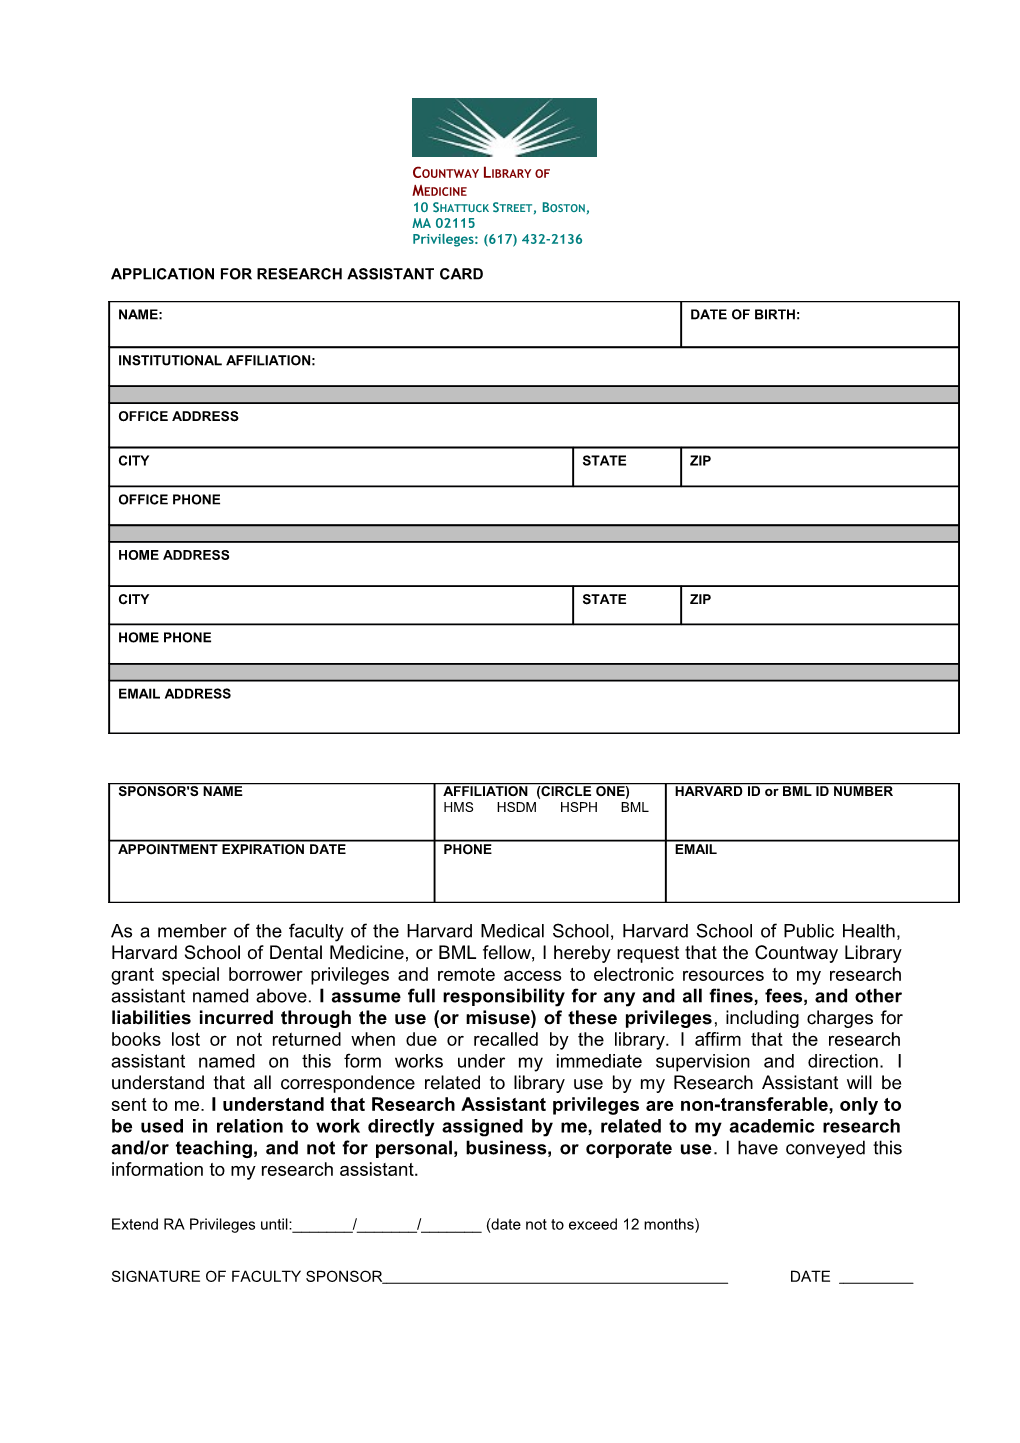 Application for Research Assistant Card